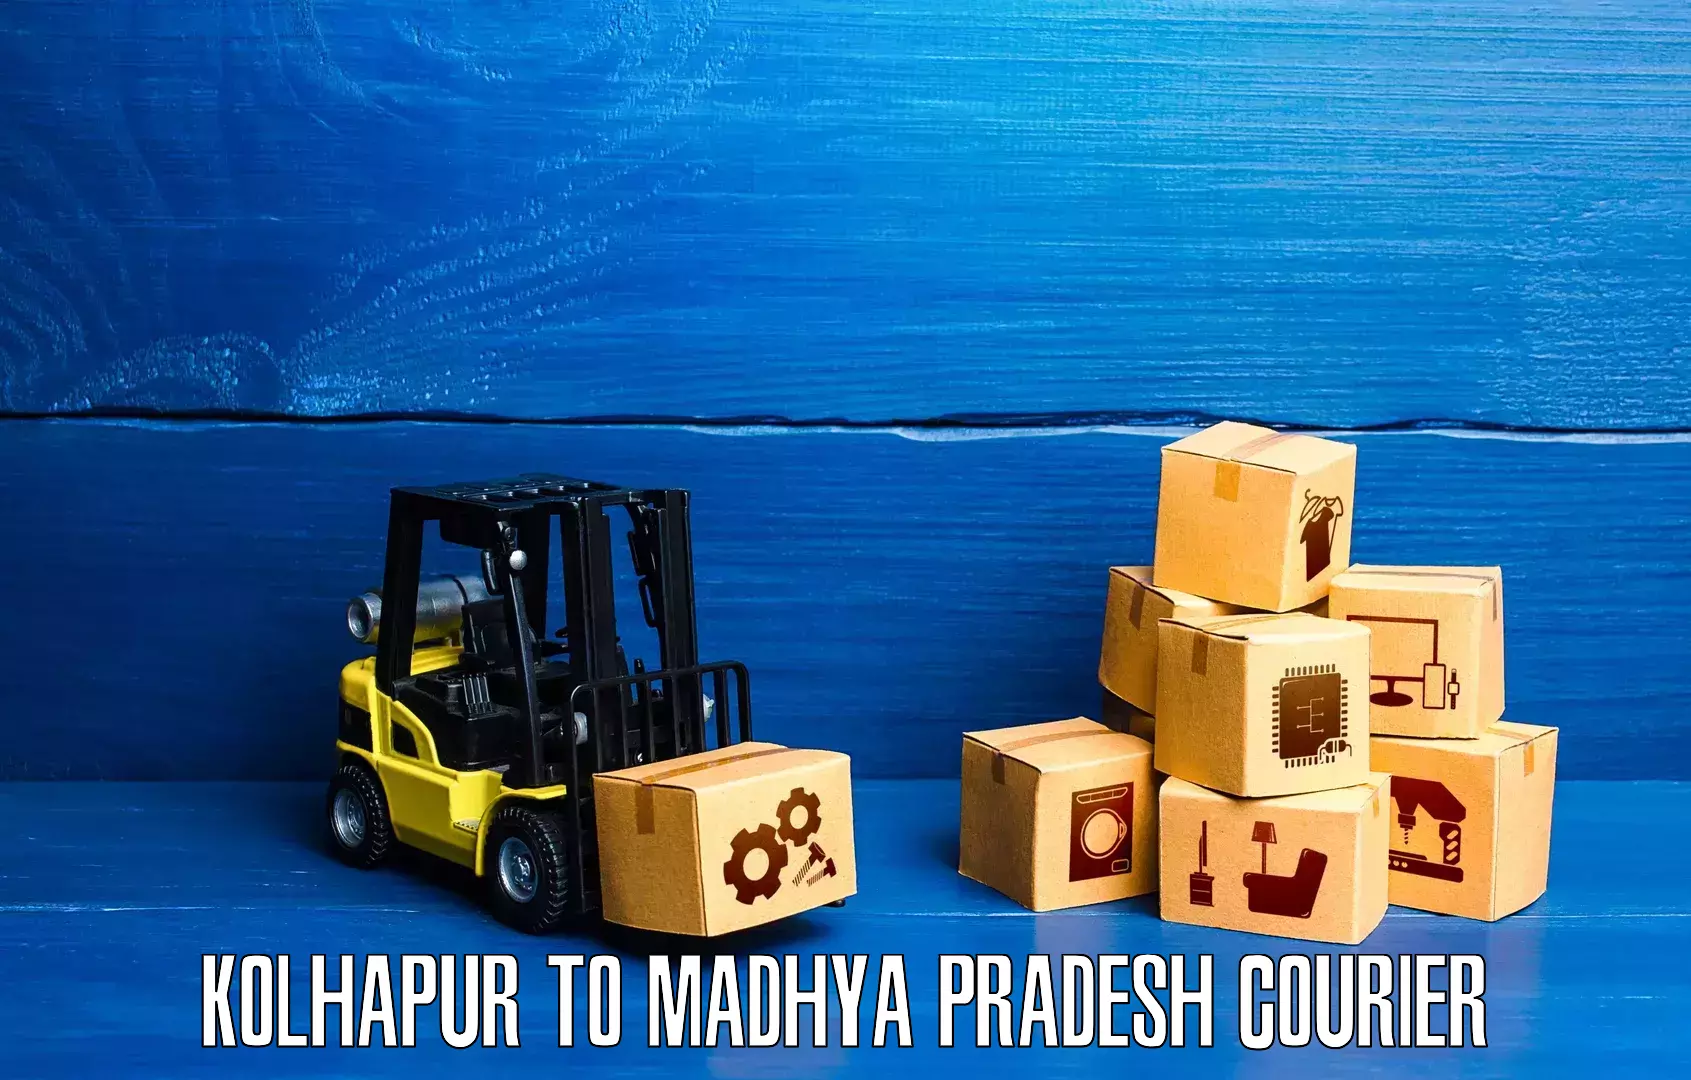 24/7 courier service in Kolhapur to Shajapur